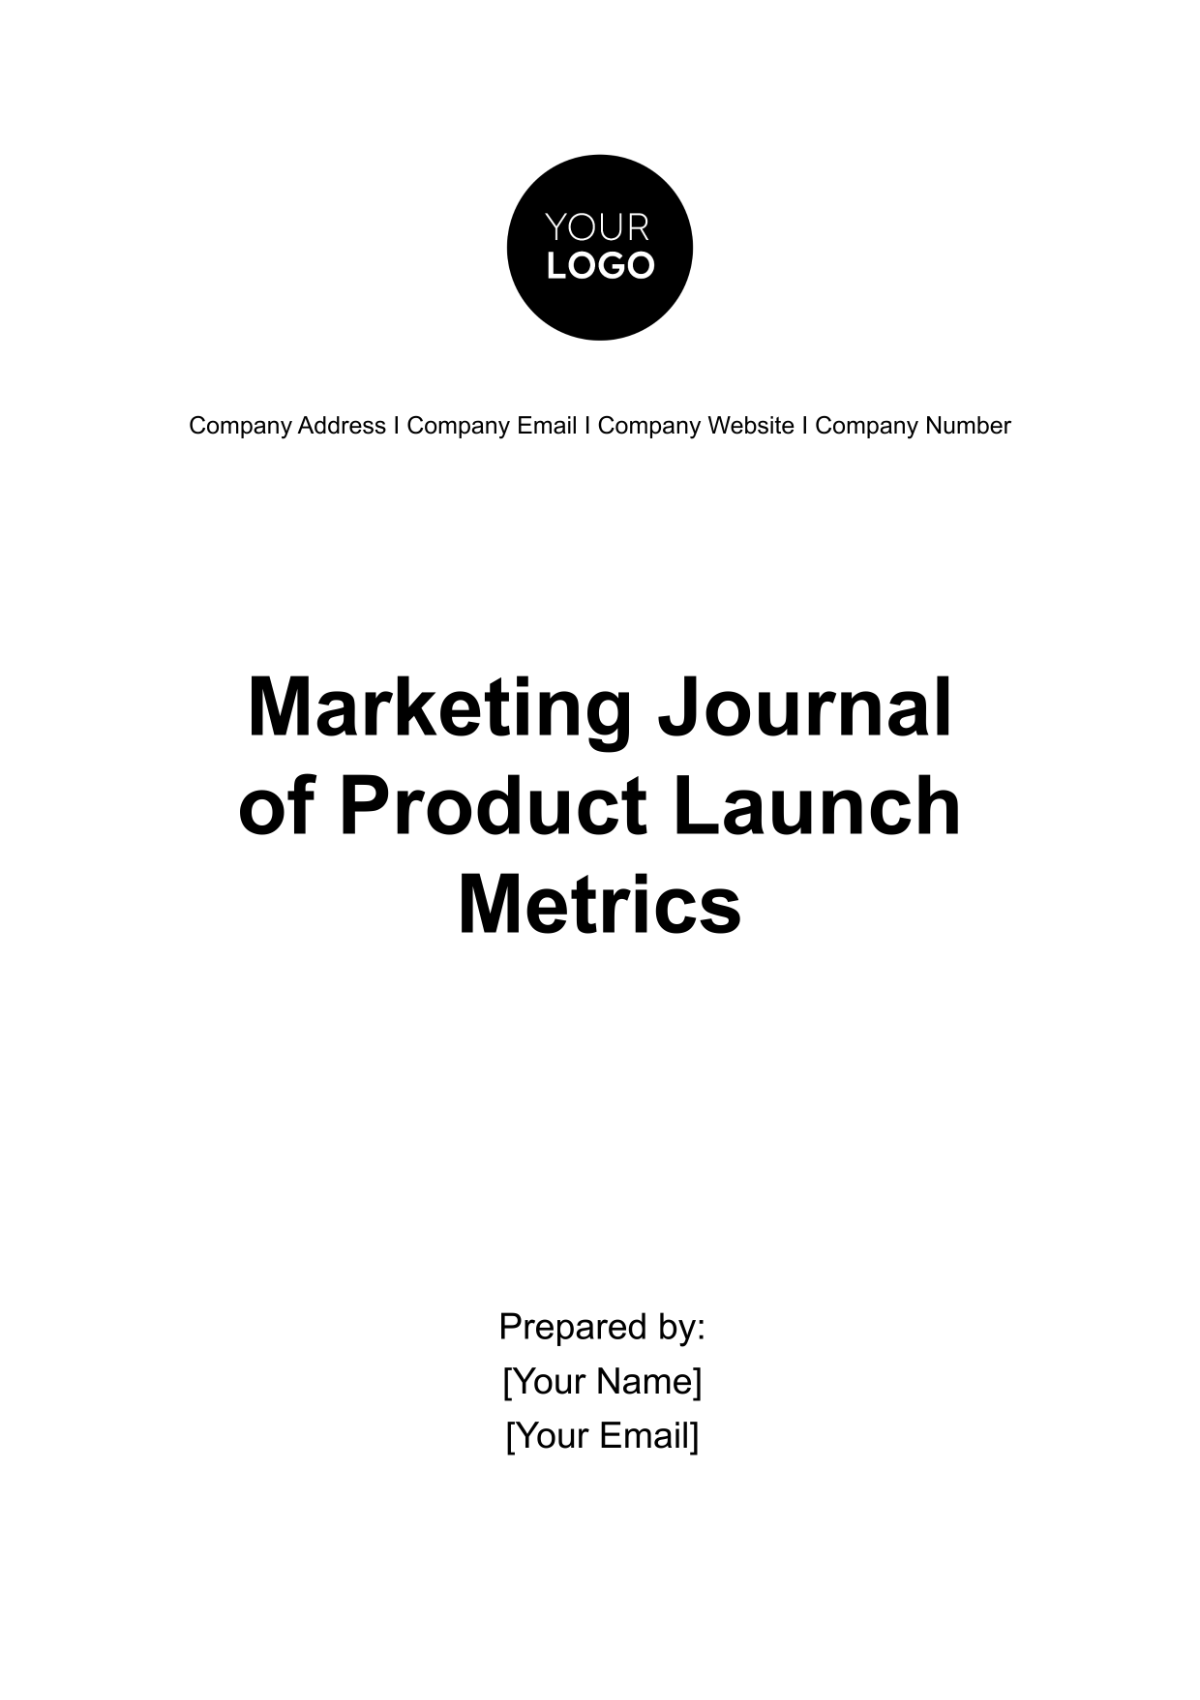 Free Marketing Journal of Product Launch Metrics Template